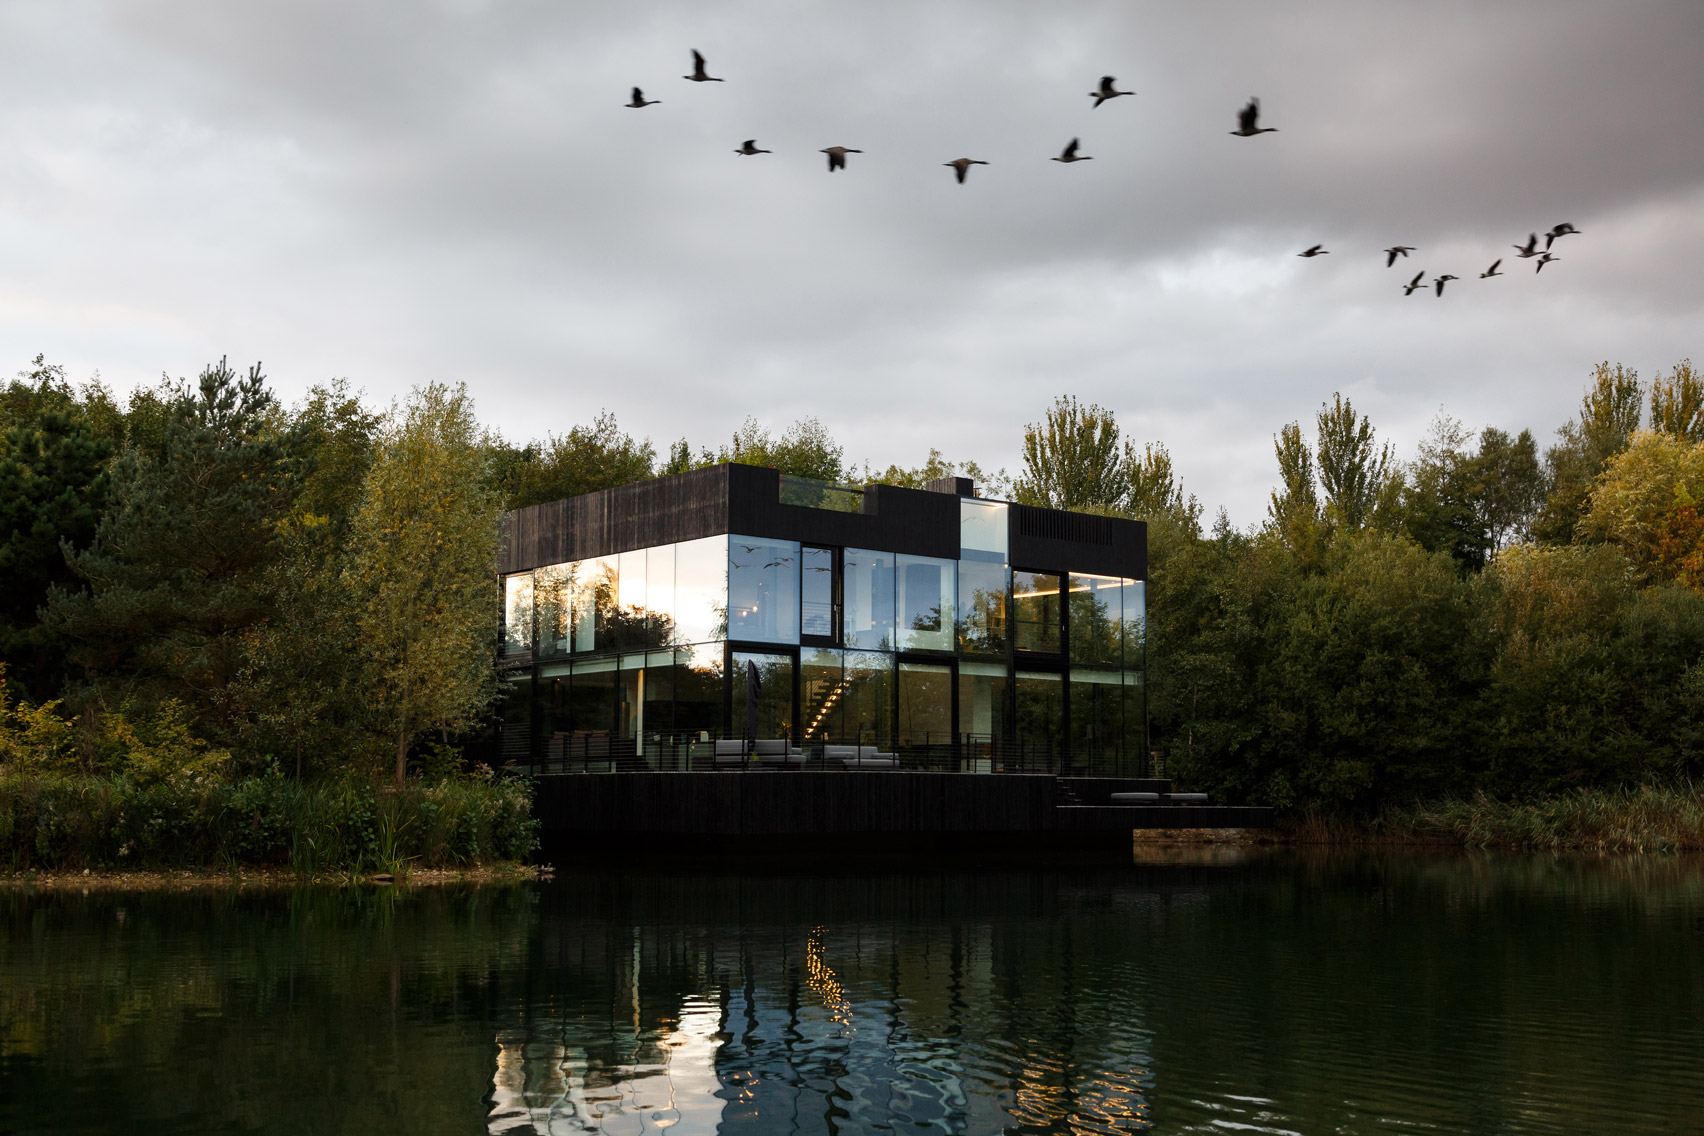 Mecanoo builds glass house partly submerged in a lake in the English countryside